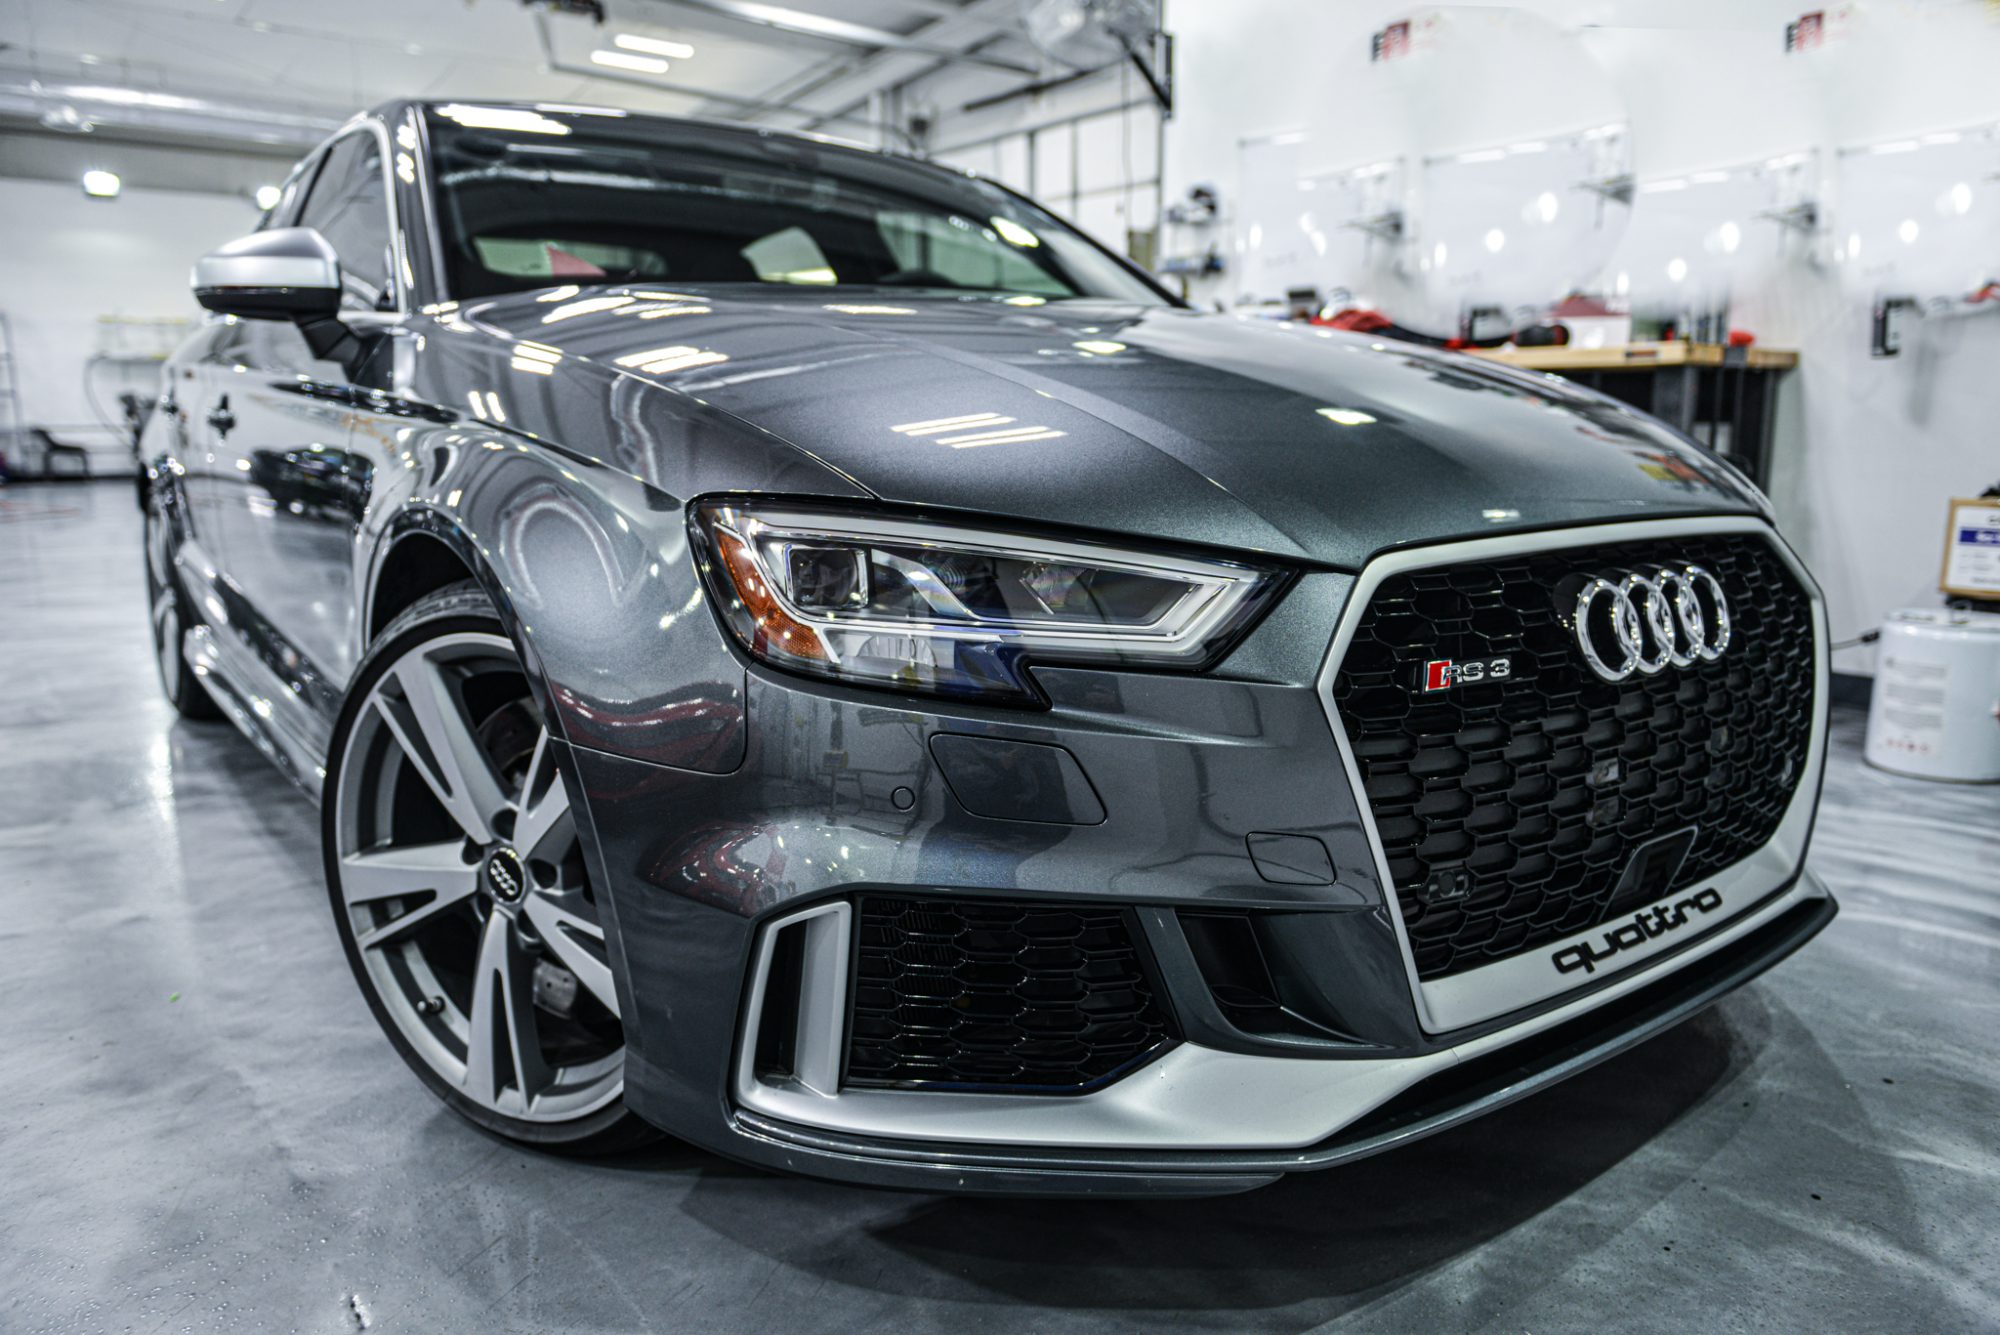 Performance & Durability With XPEL Ultimate Plus Paint Protection